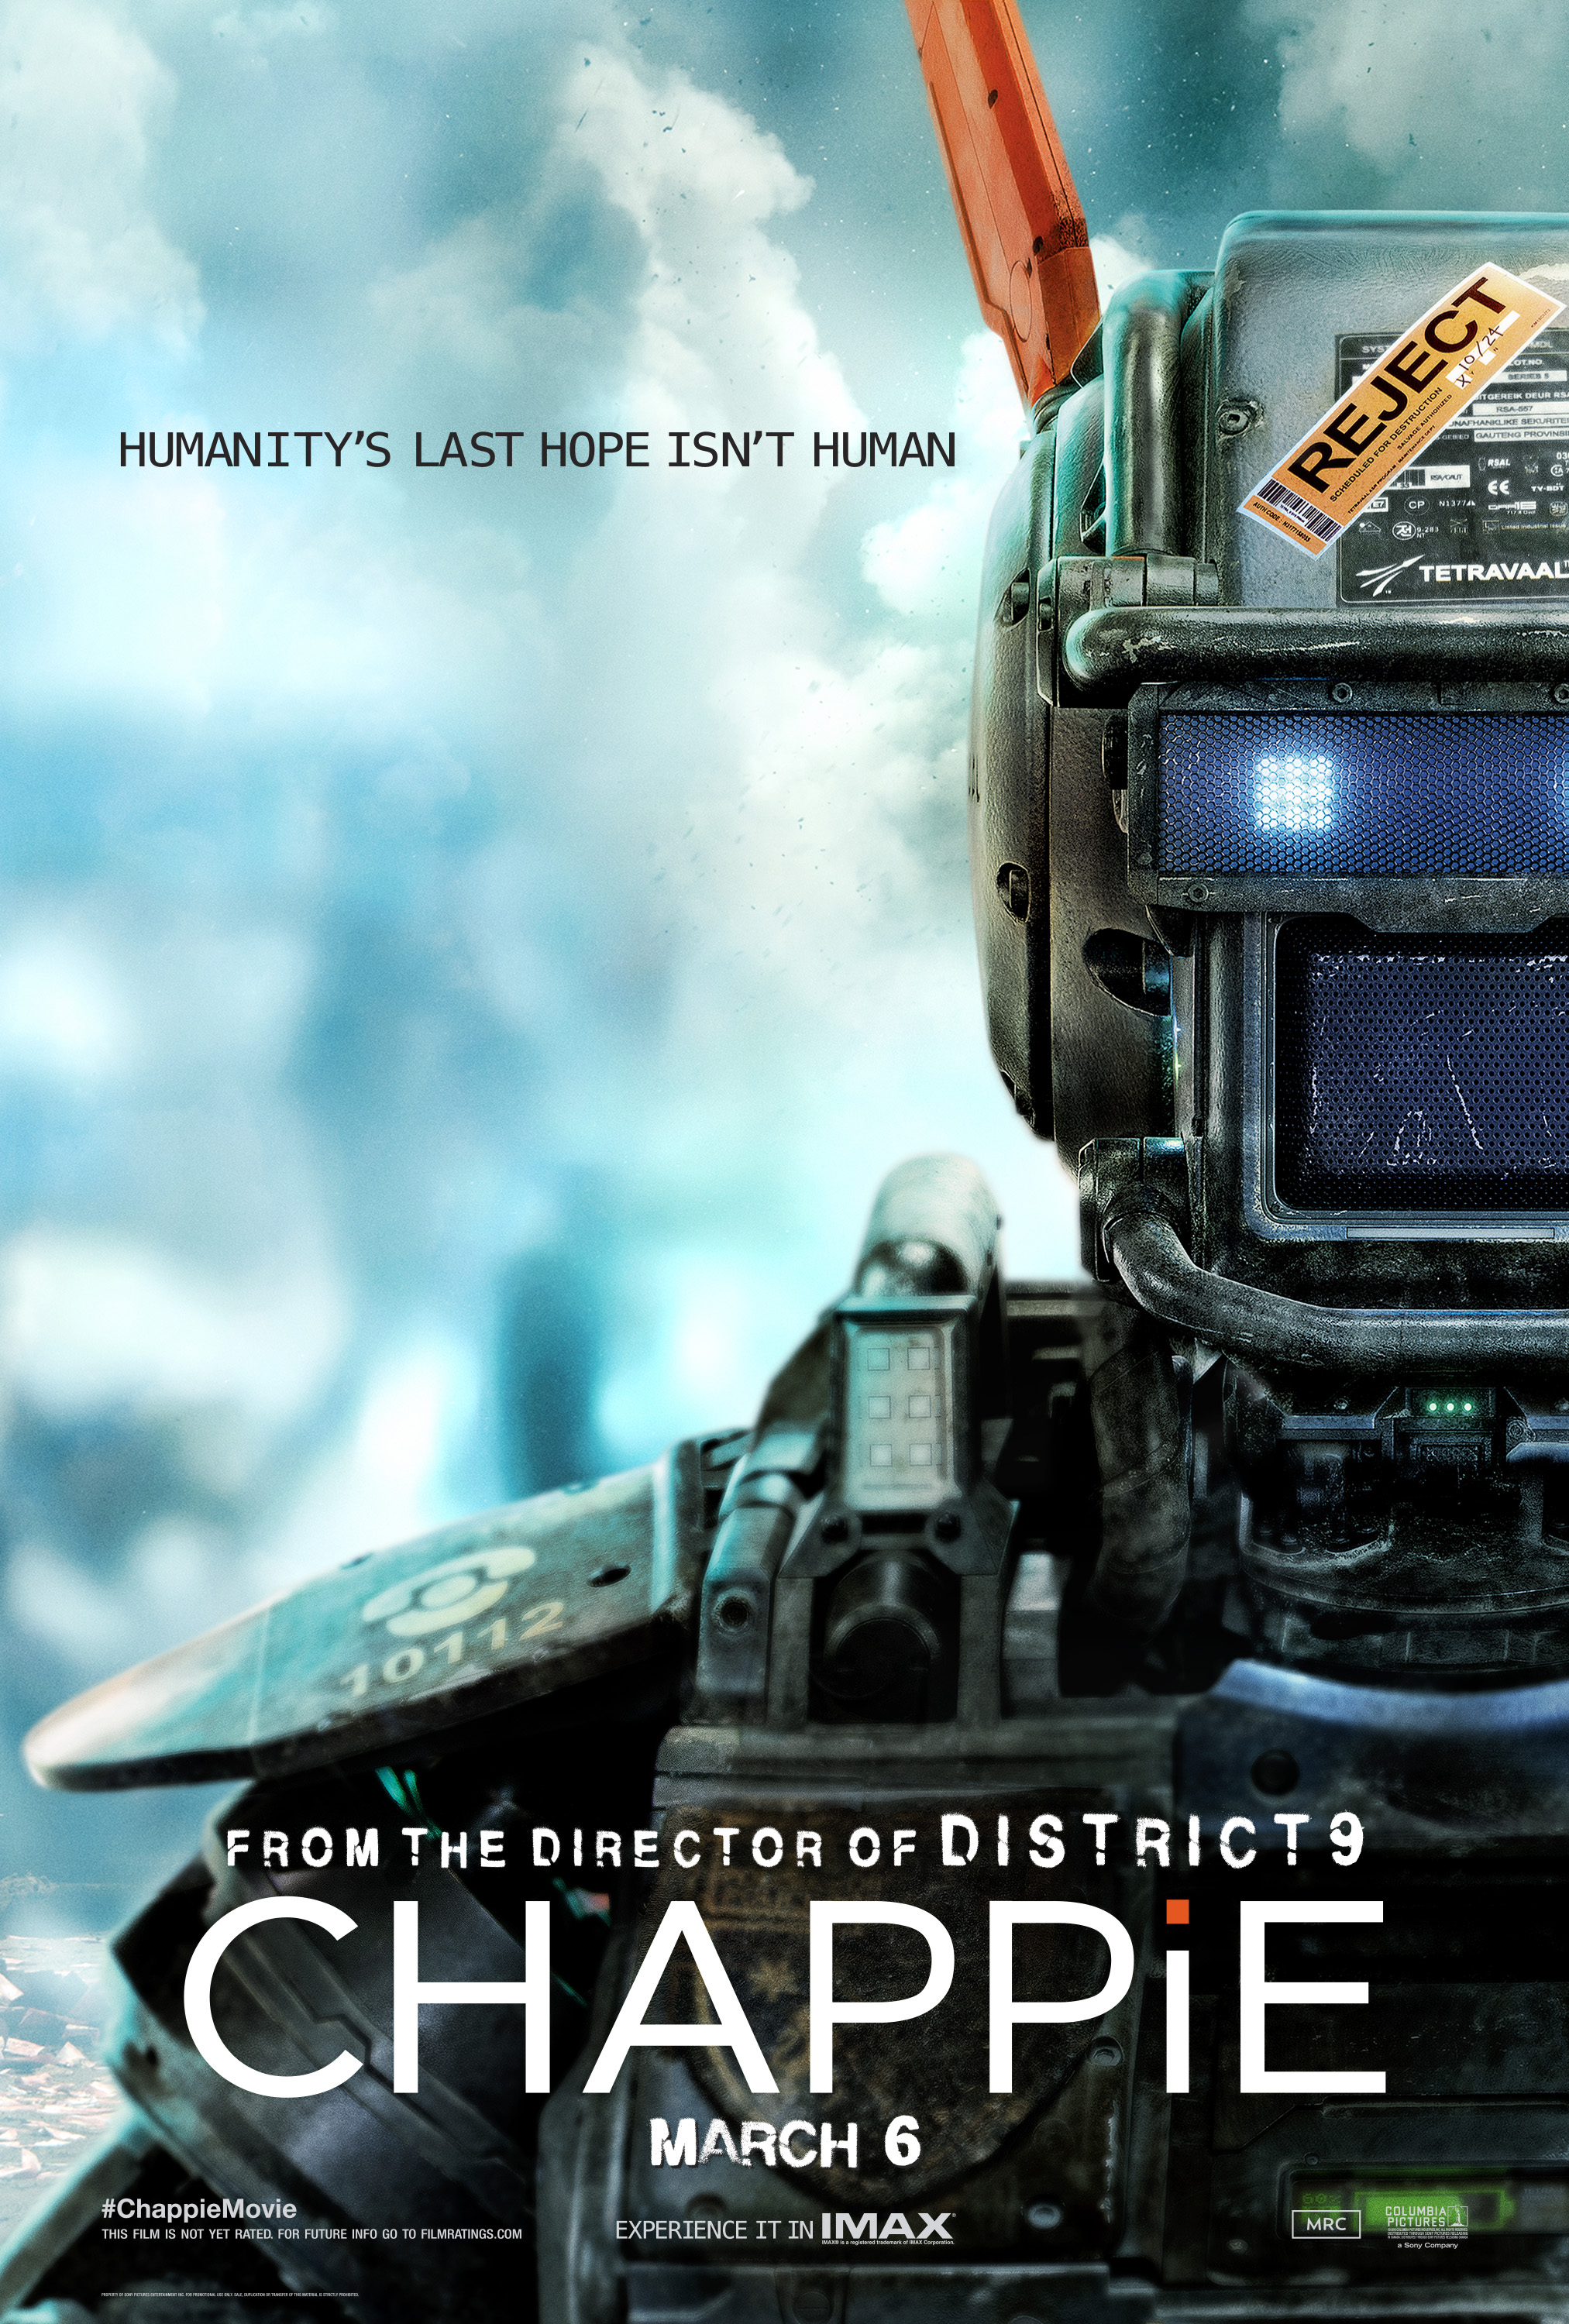 Columbia Pictures presents: Chappie Wednesday | March 4 7:30 pm  In the near future, a